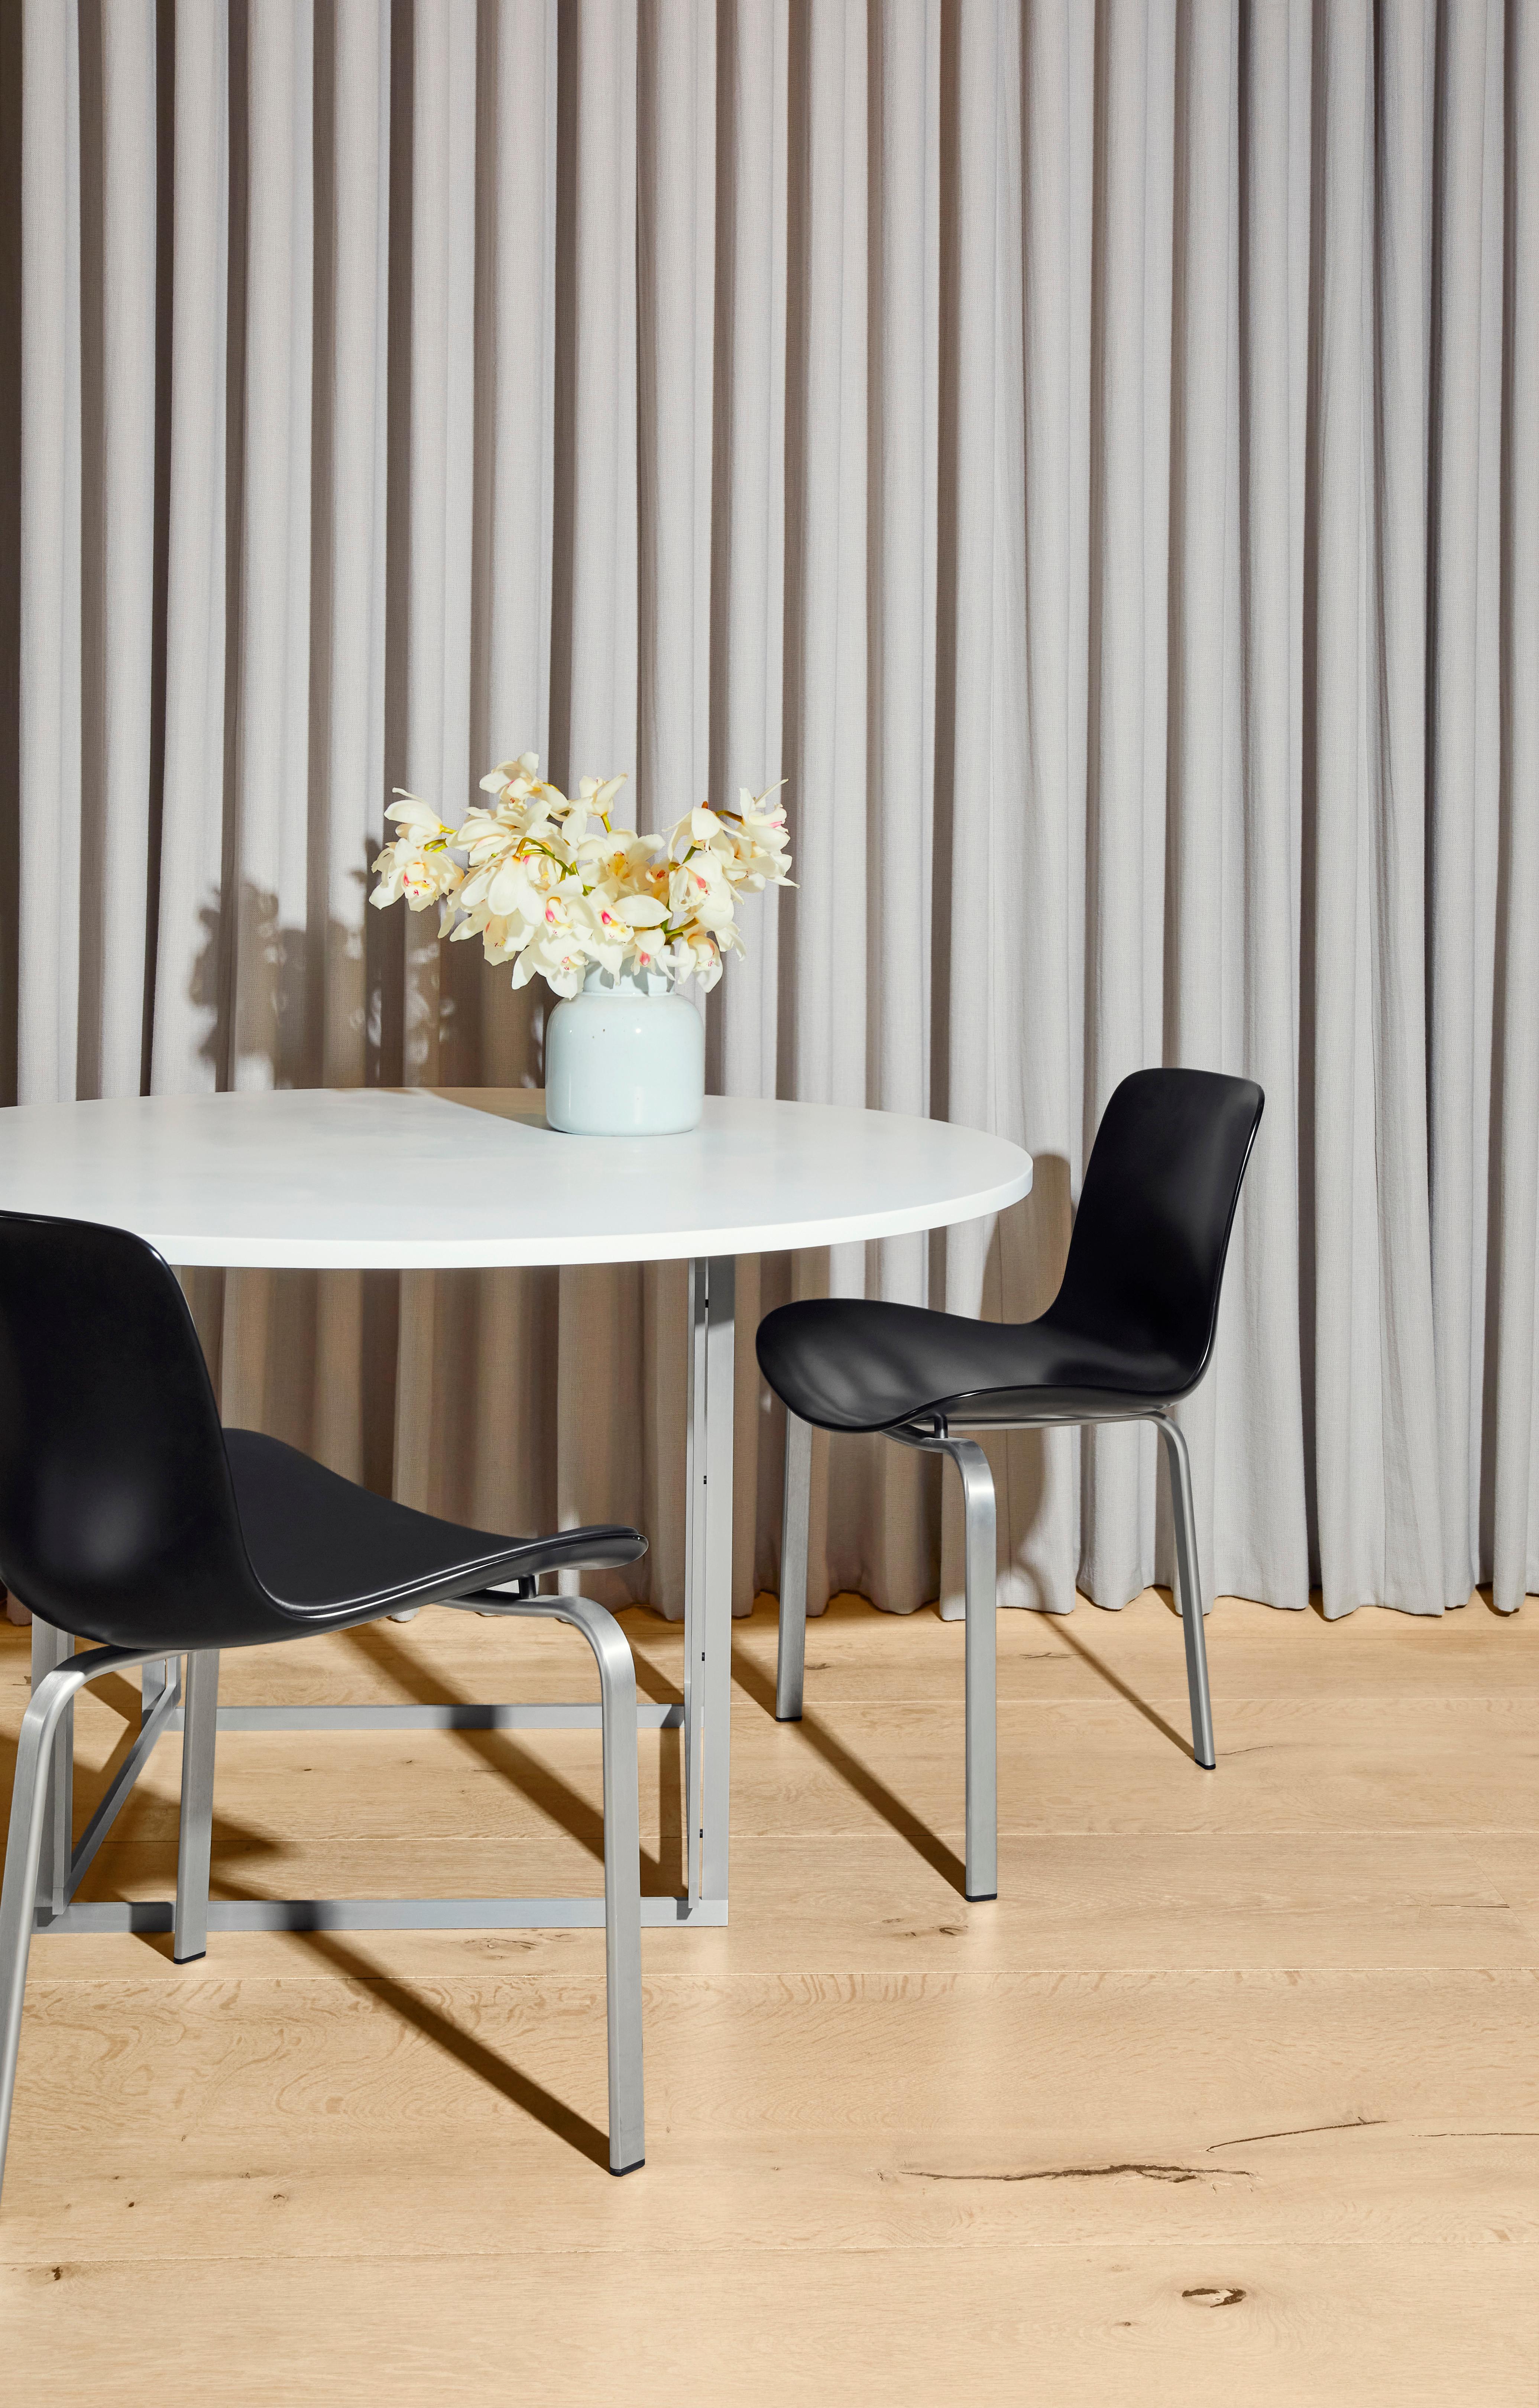 Poul Kjærholm 'PK8' Dining Chair for Fritz Hansen in Aura Leather Upholstery.

Established in 1872, Fritz Hansen has become synonymous with legendary Danish design. Combining timeless craftsmanship with an emphasis on sustainability, the brand’s